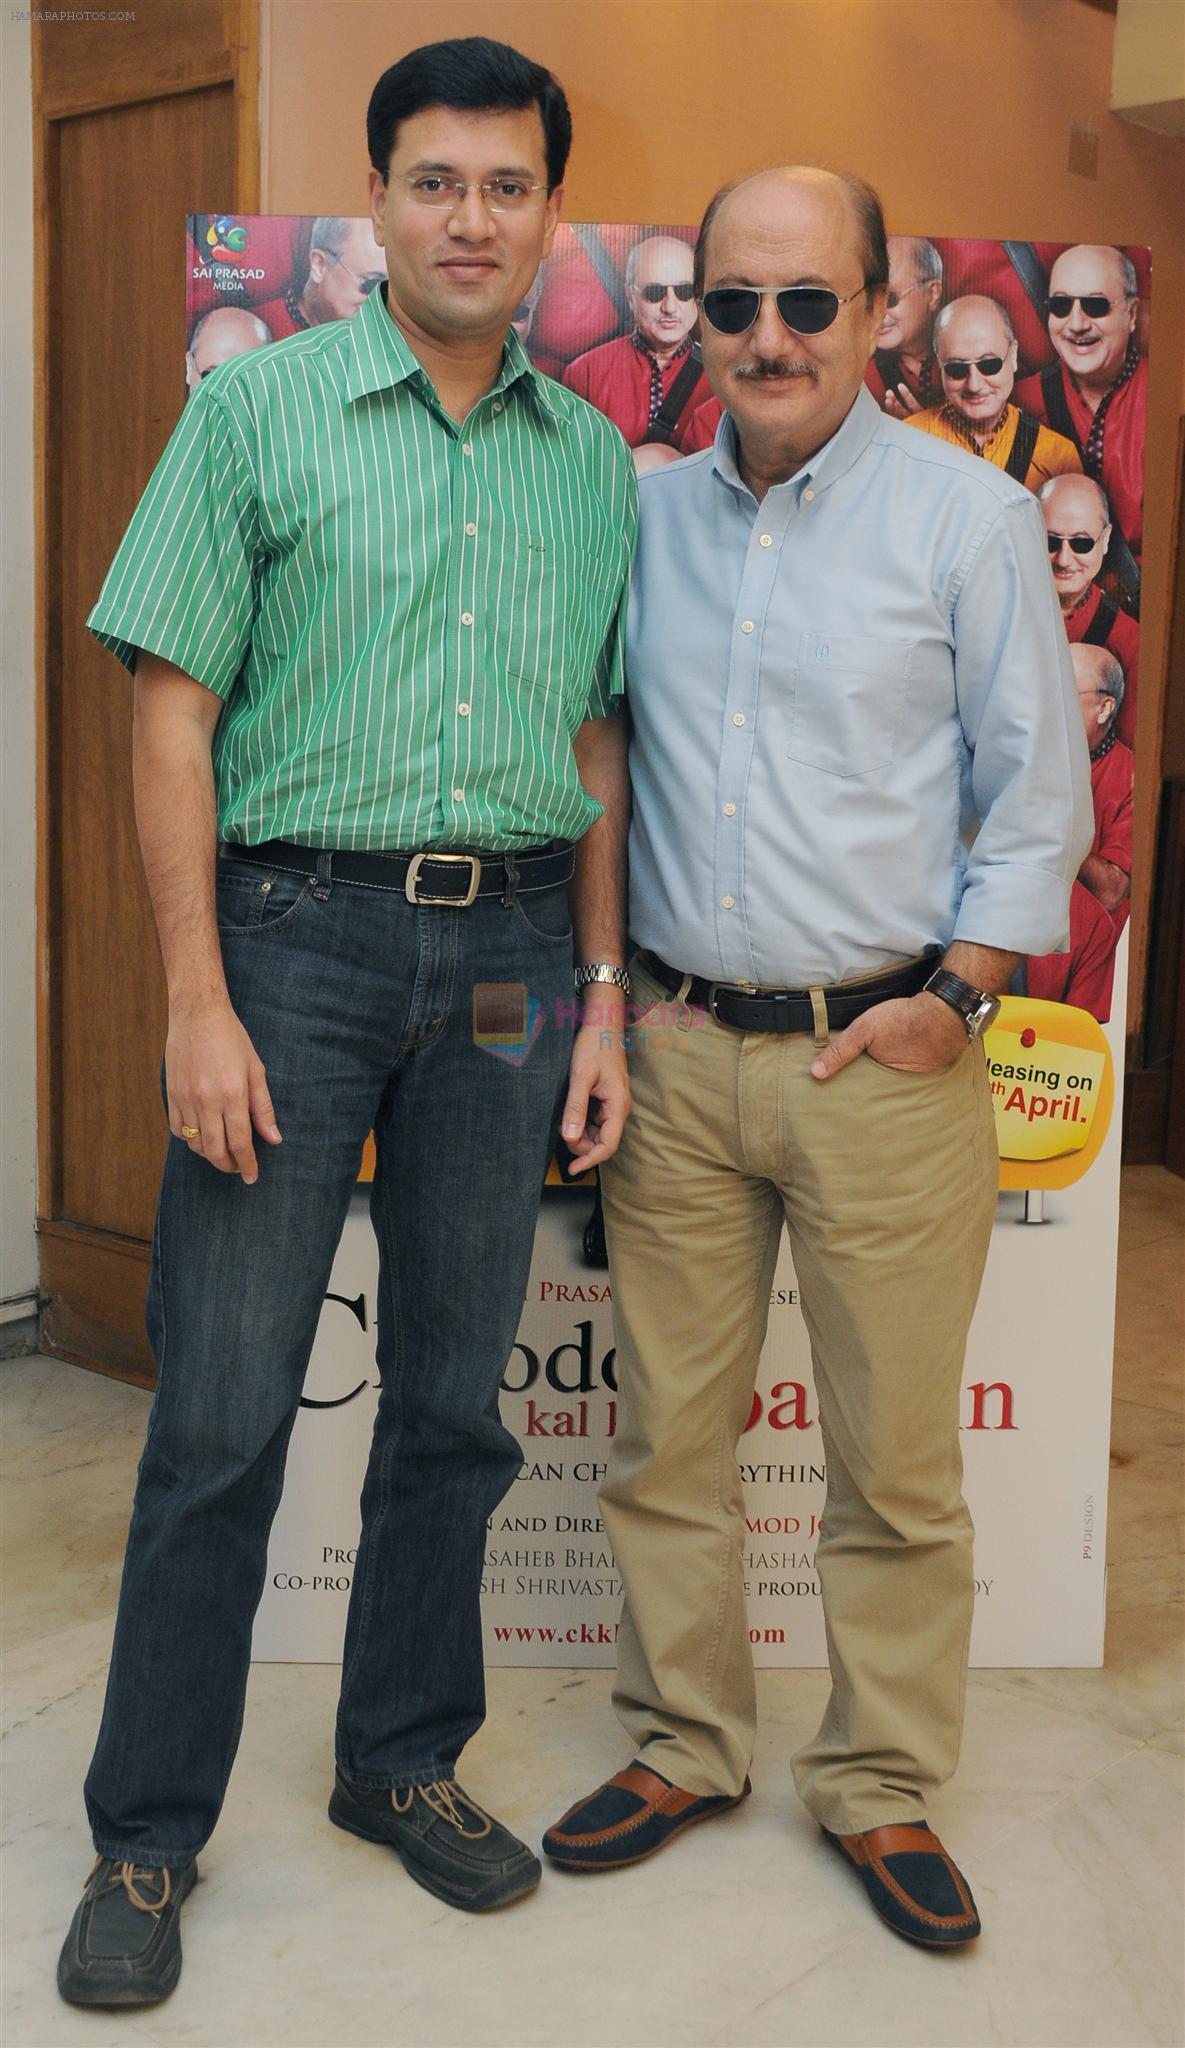 Anupam Kher with Director Pramod Joshi at the film promotions of Chhodo Kal Ki Baatein in Mumbai on 31st March 2012